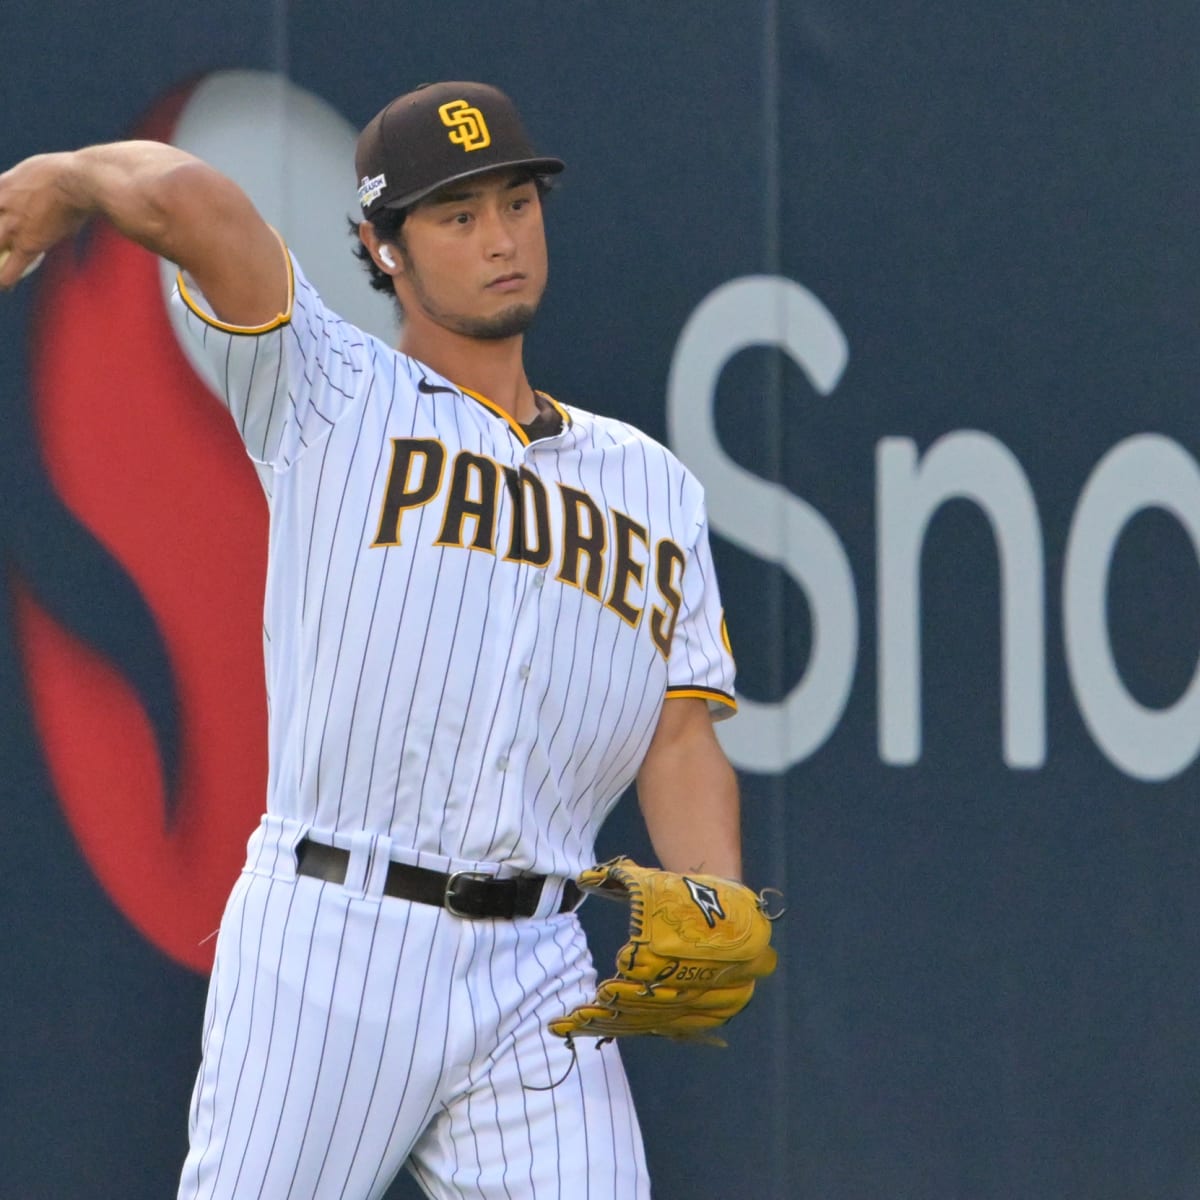 Padres News: RHP Yu Darvish May Not Be Ready For Opening Day - Sports  Illustrated Inside The Padres News, Analysis and More